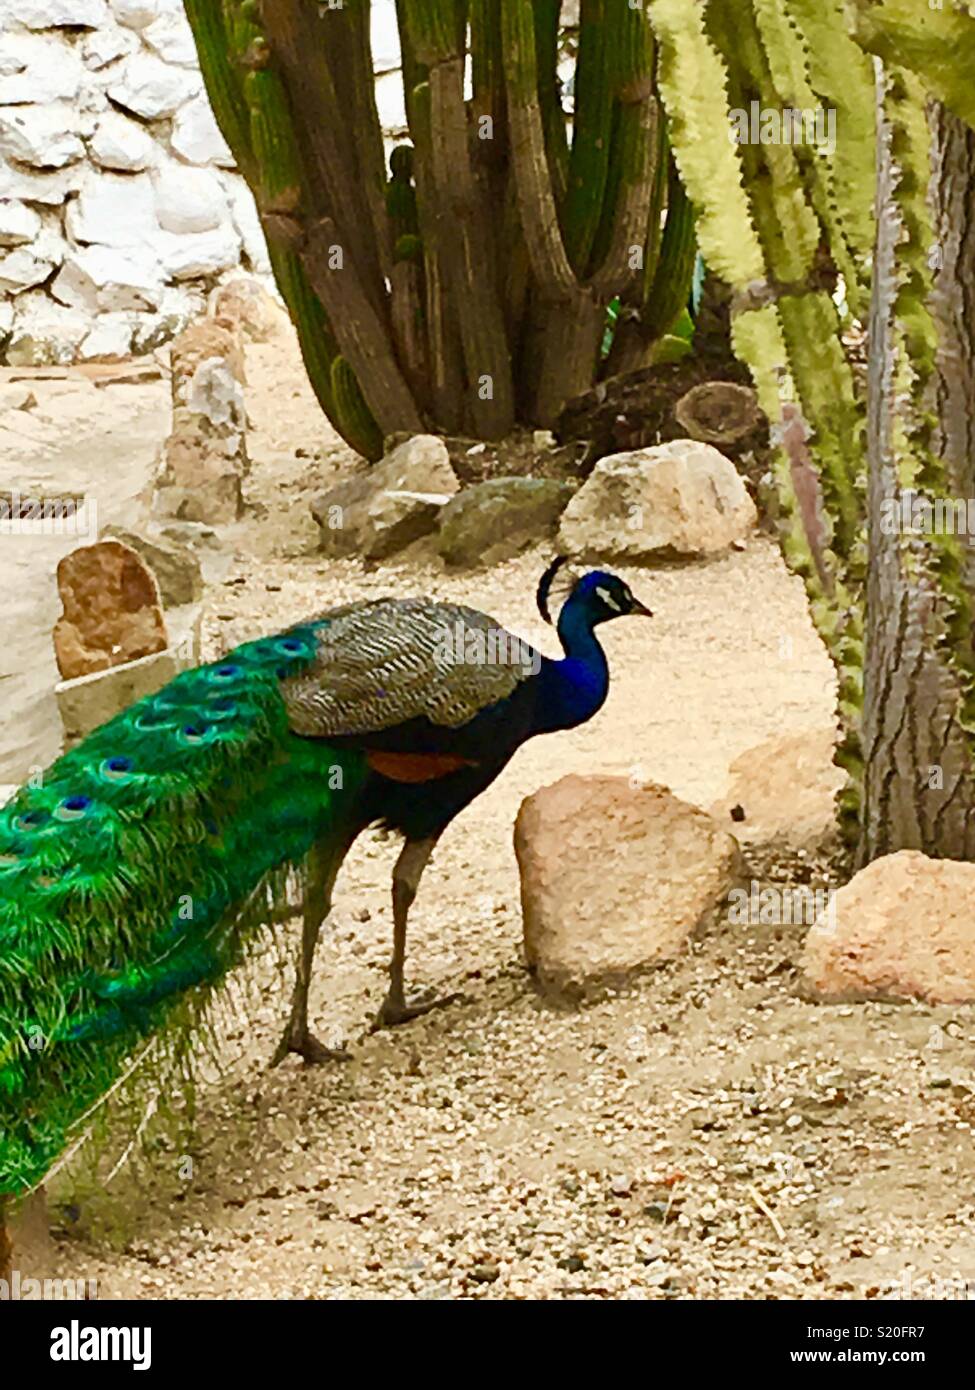 Colorful male peacock  blue and green peacock walking amongst large light green cactus plants in desert landscape in Southern California Stock Photo